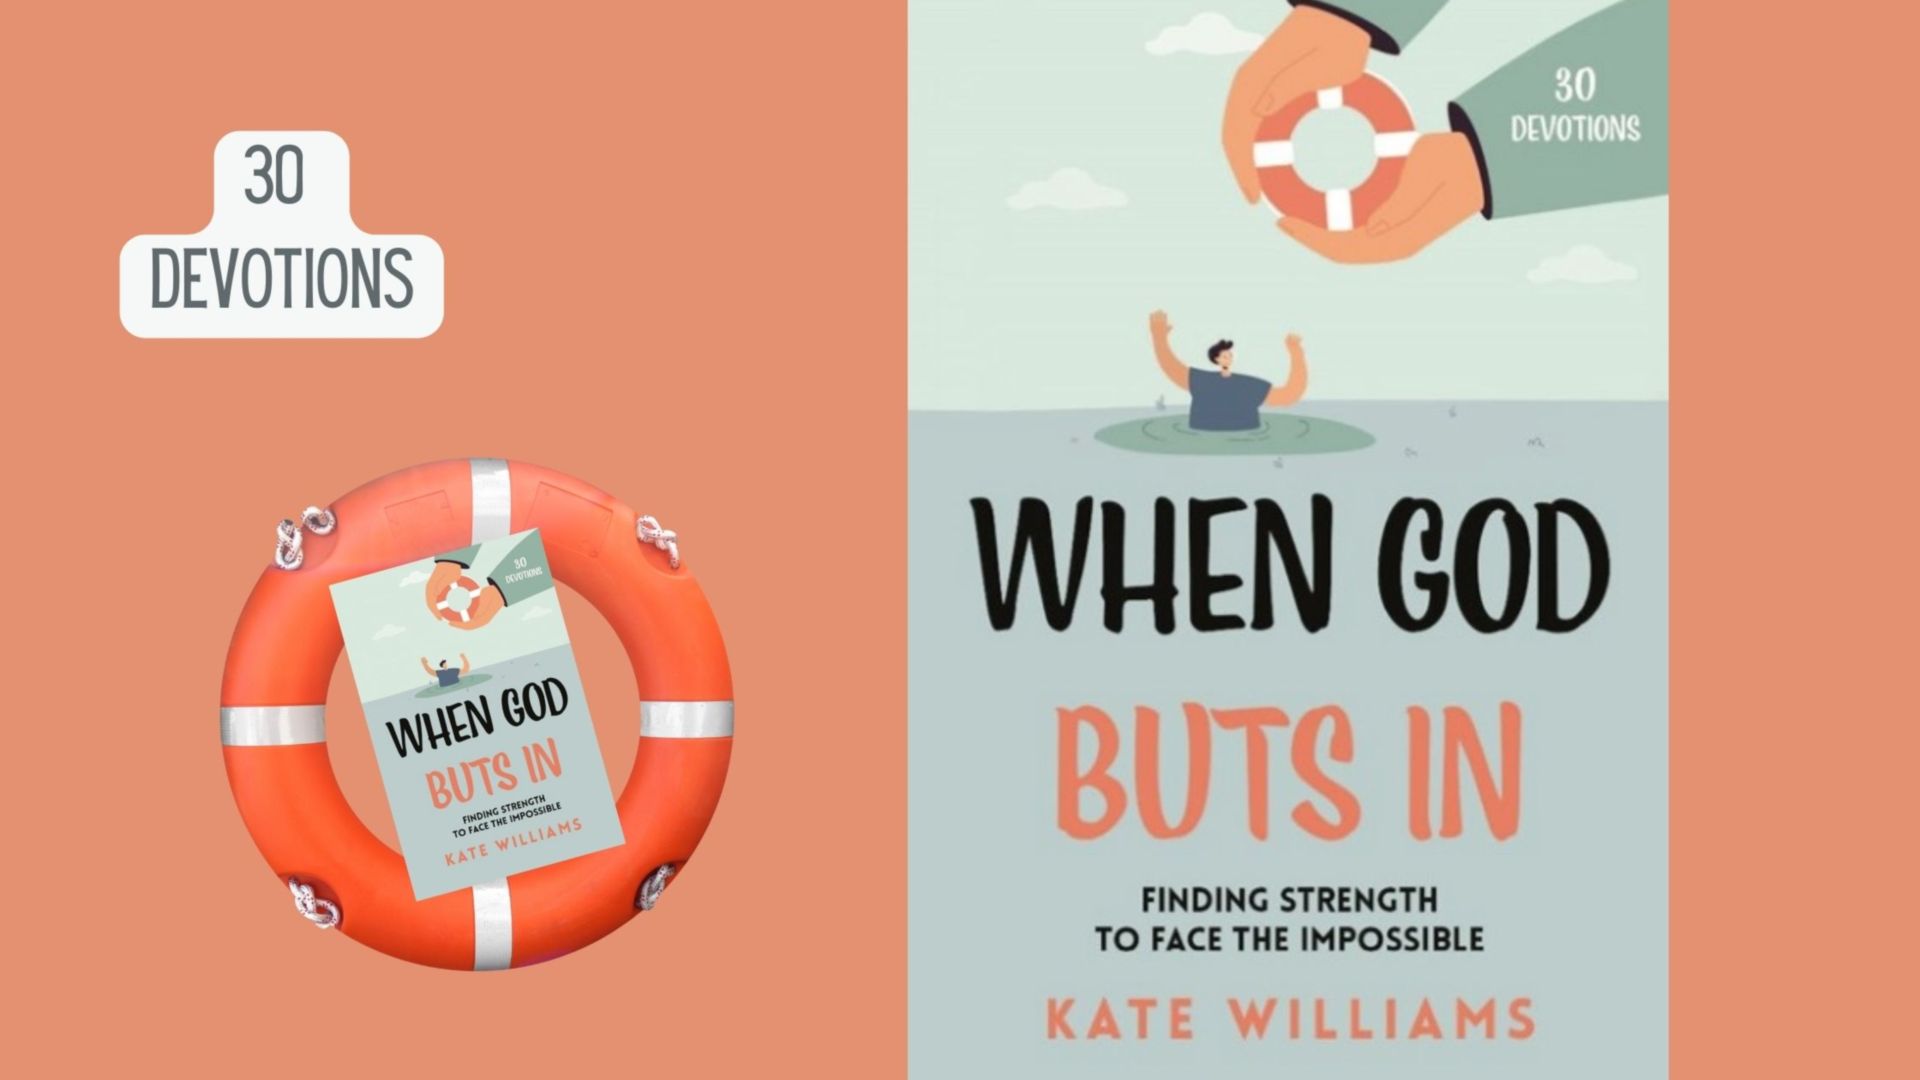 An interview with Kate Williams, author of 'When God Buts In'